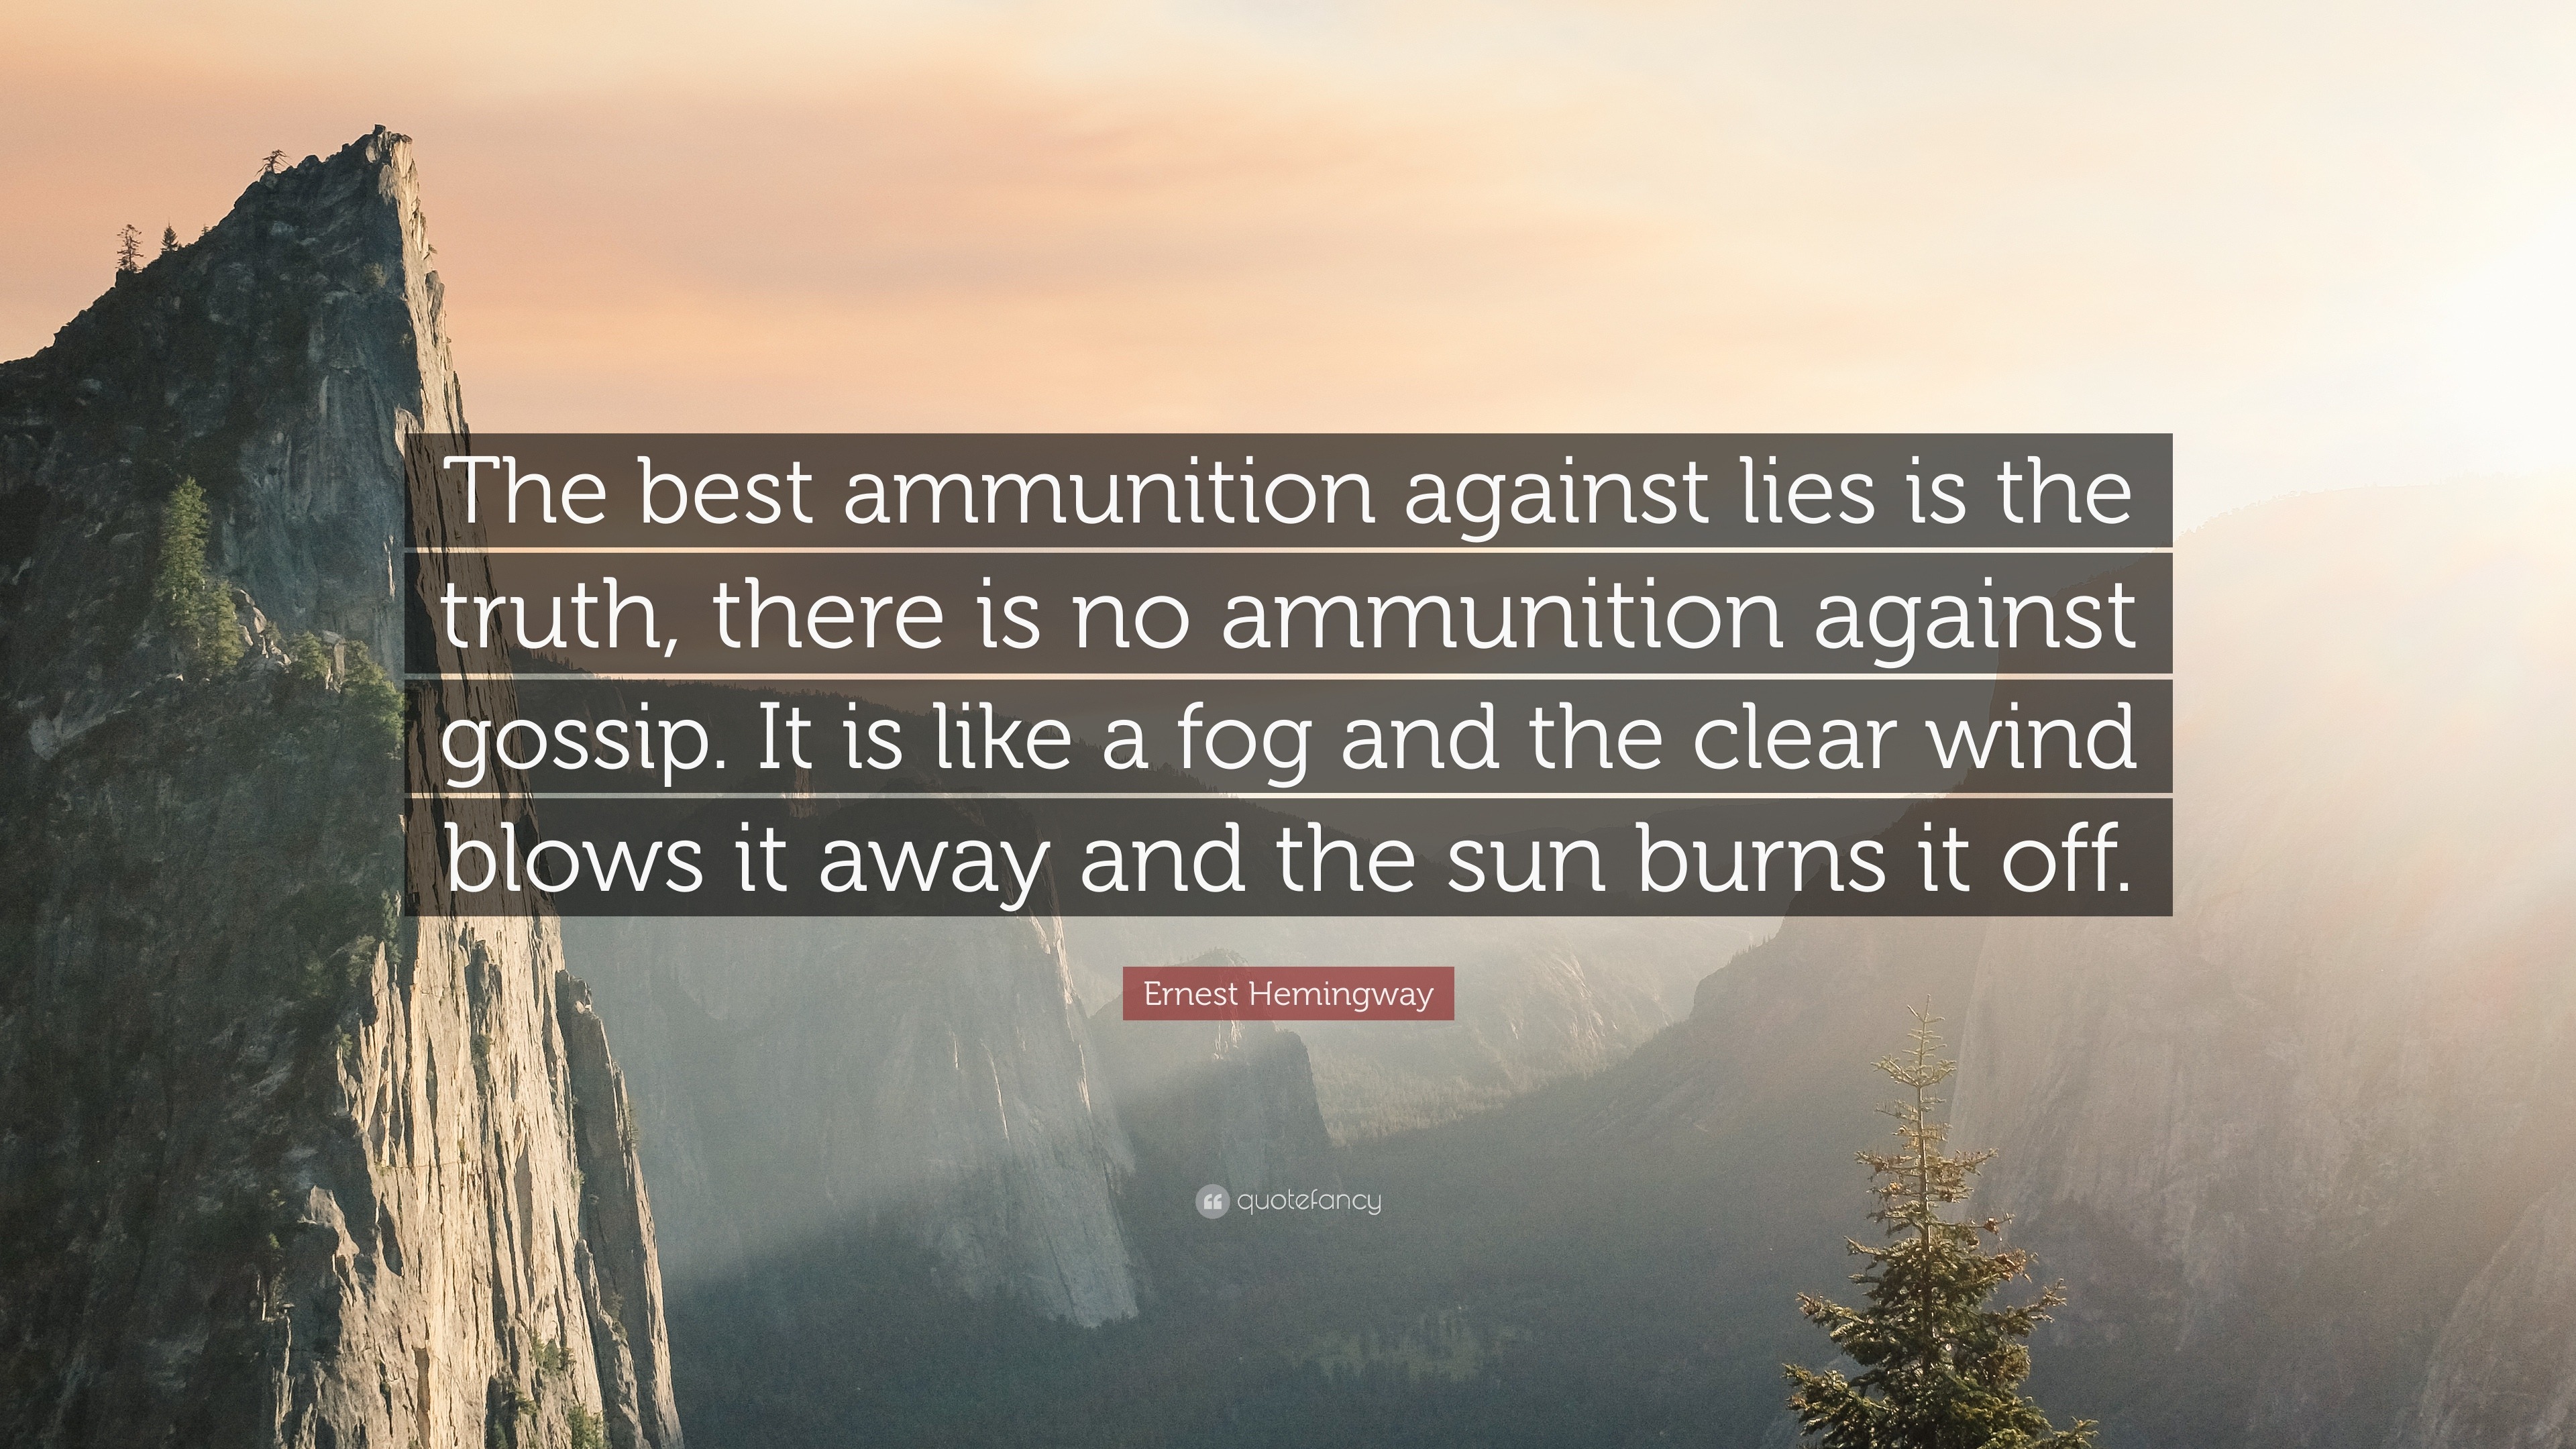 Ernest Hemingway Quote: "The best ammunition against lies is the truth, there is no ammunition ...